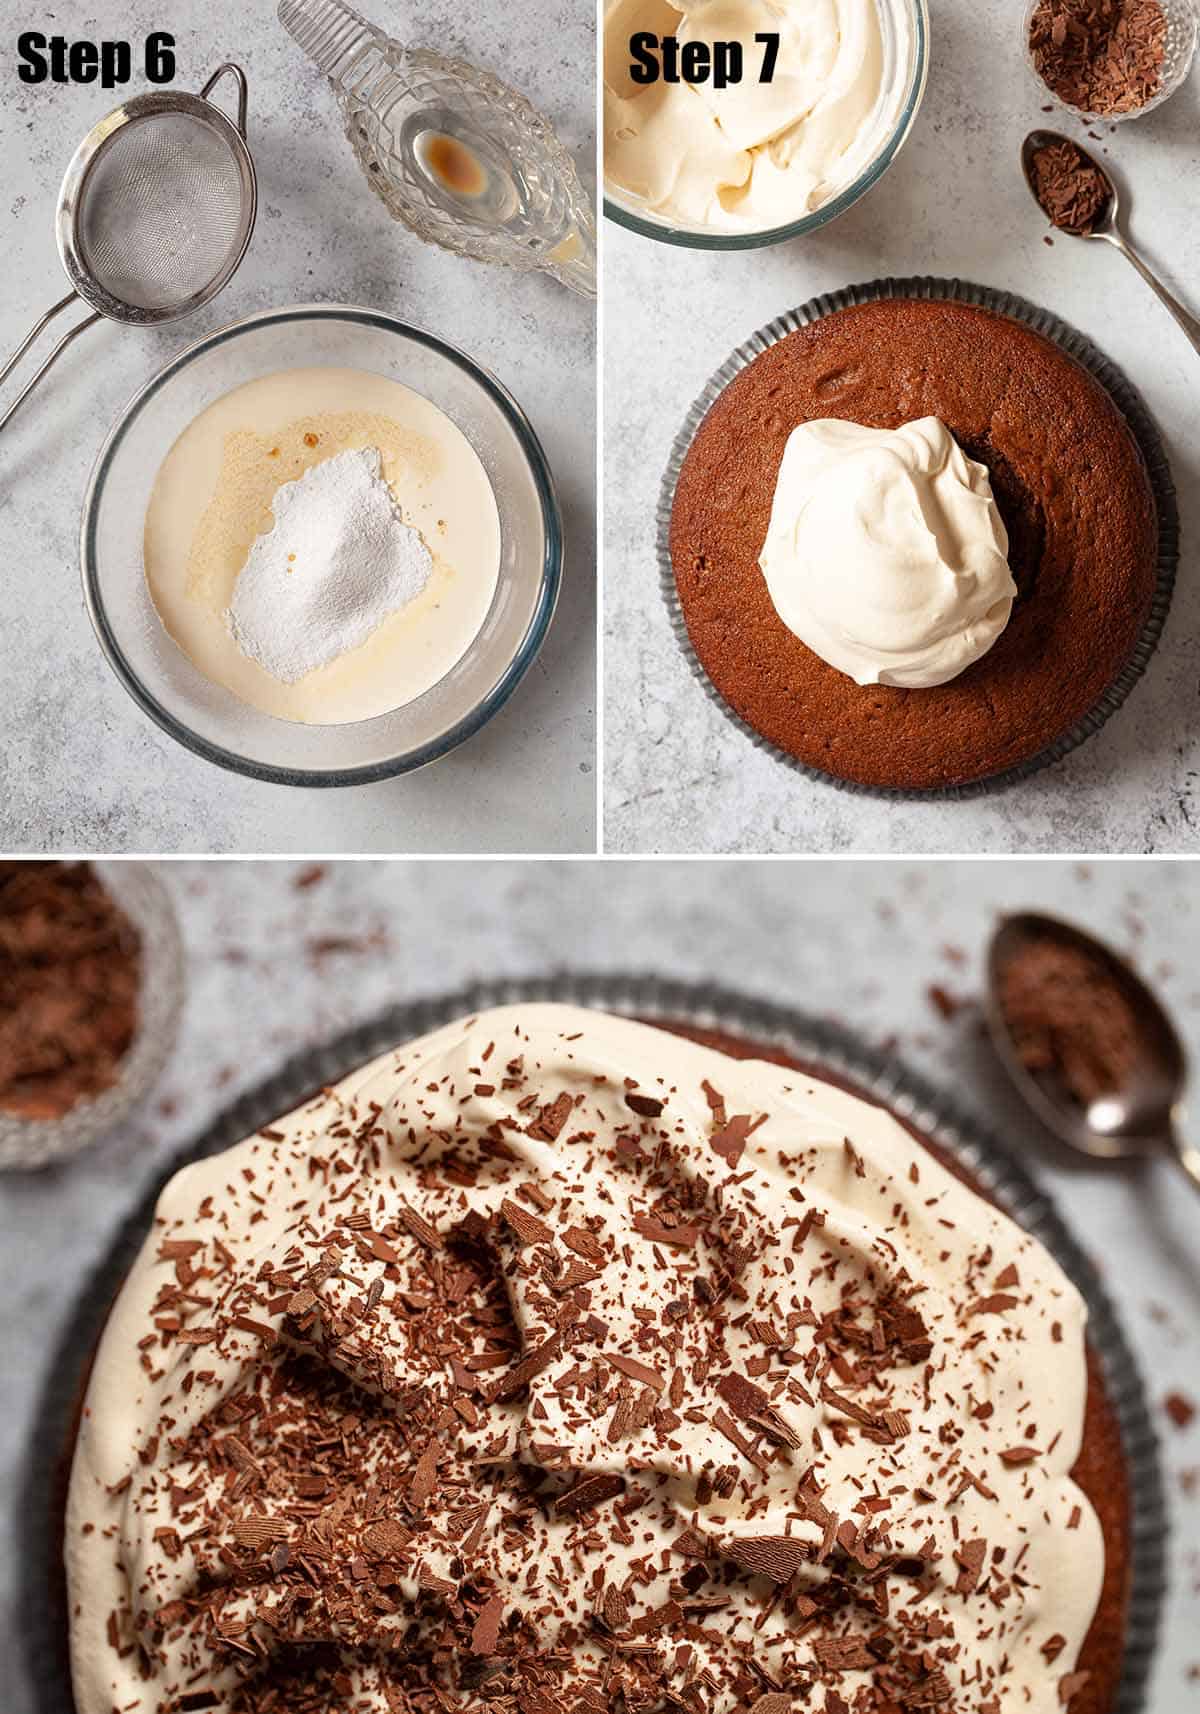 Collage of images showing a cake being decorated with whipped cream.